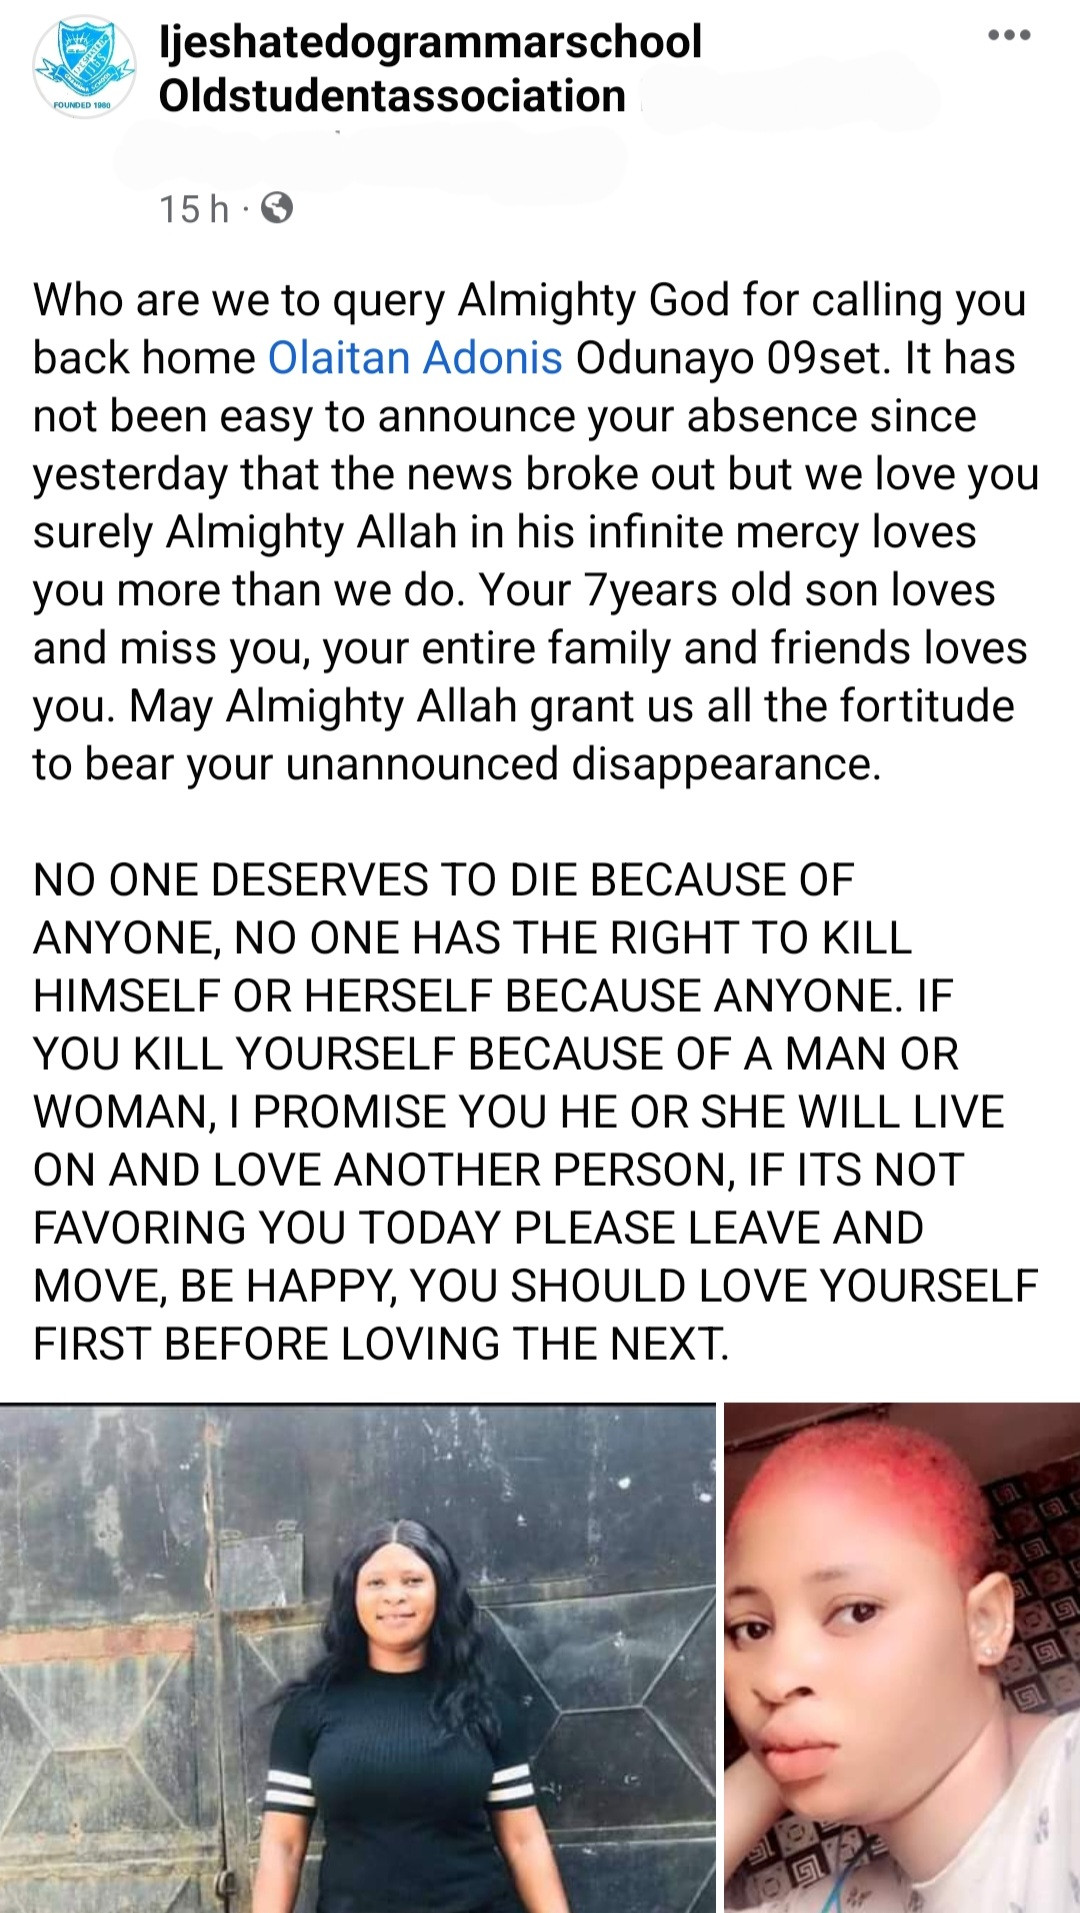 Nigerian lady commits suicide as her lover allegedly used her money to marry another woman